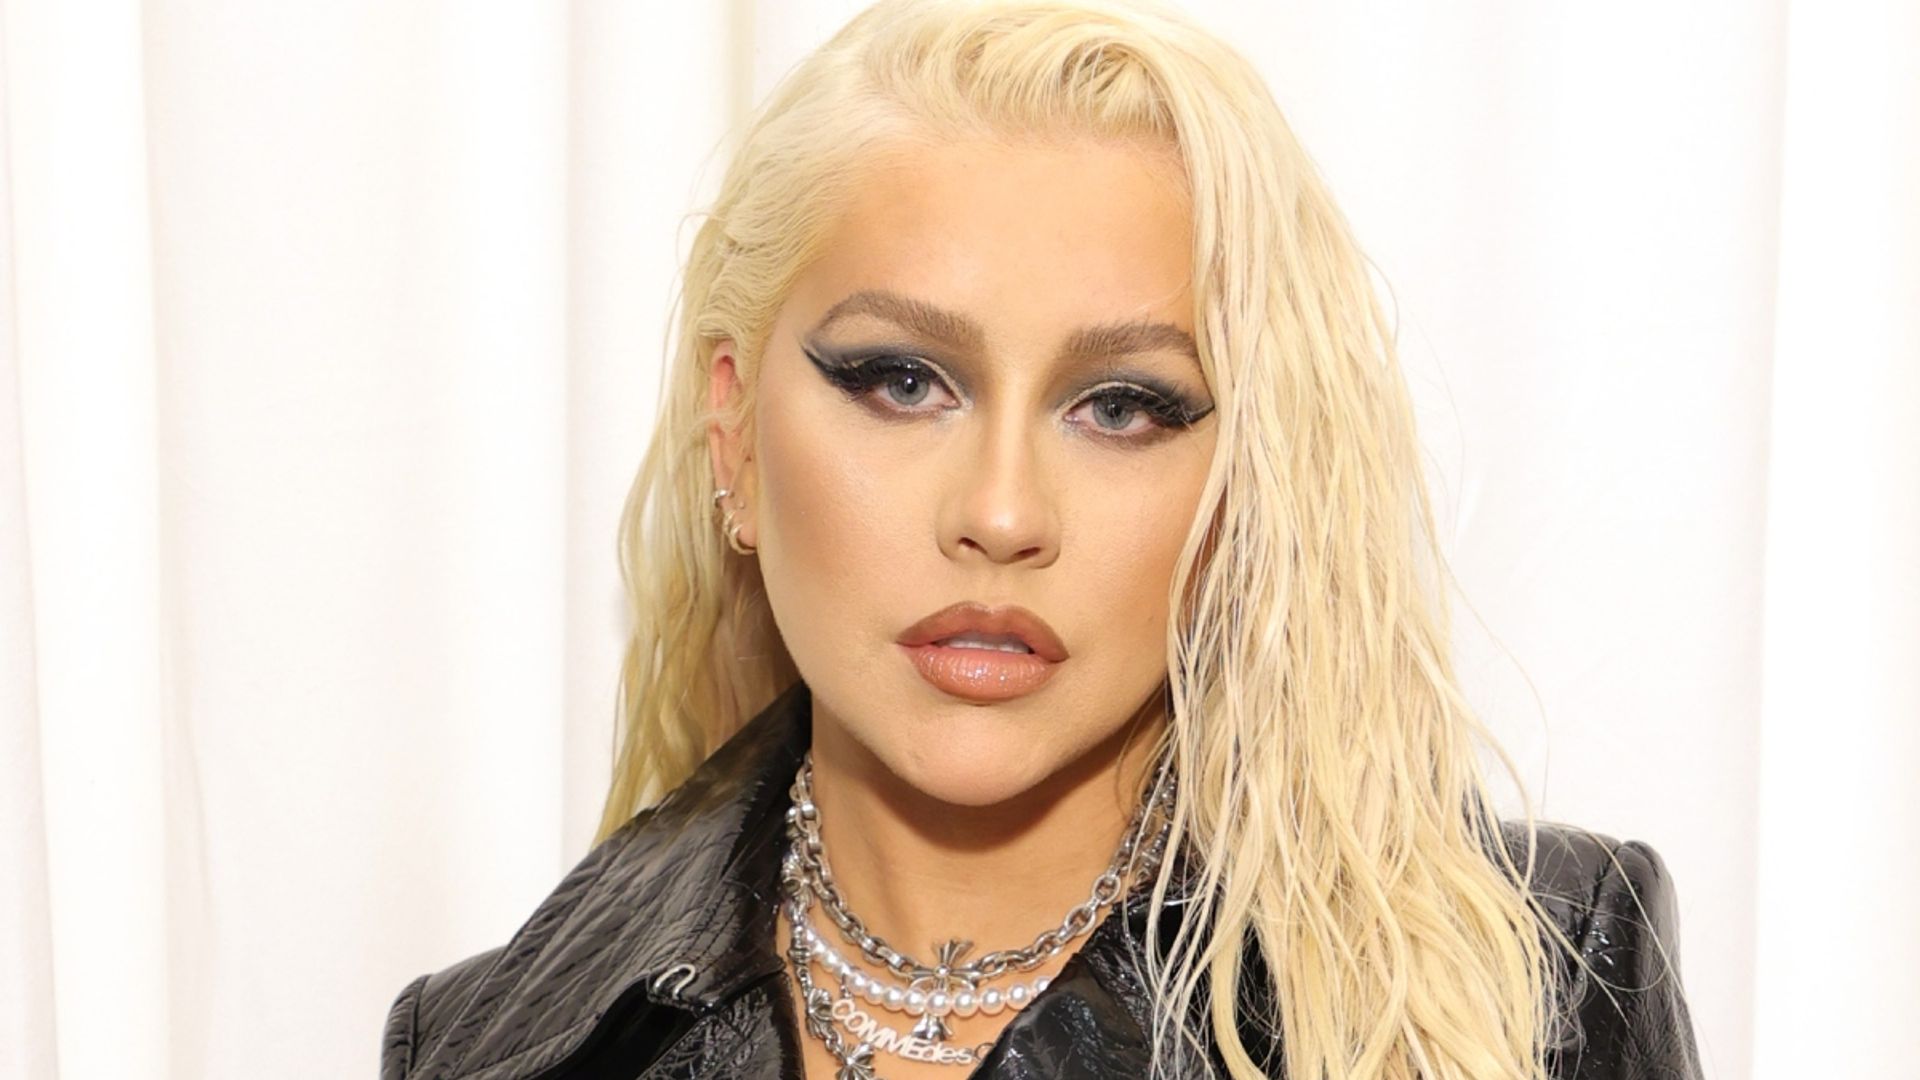 Christina Aguilera shows off her physique in skin-tight black